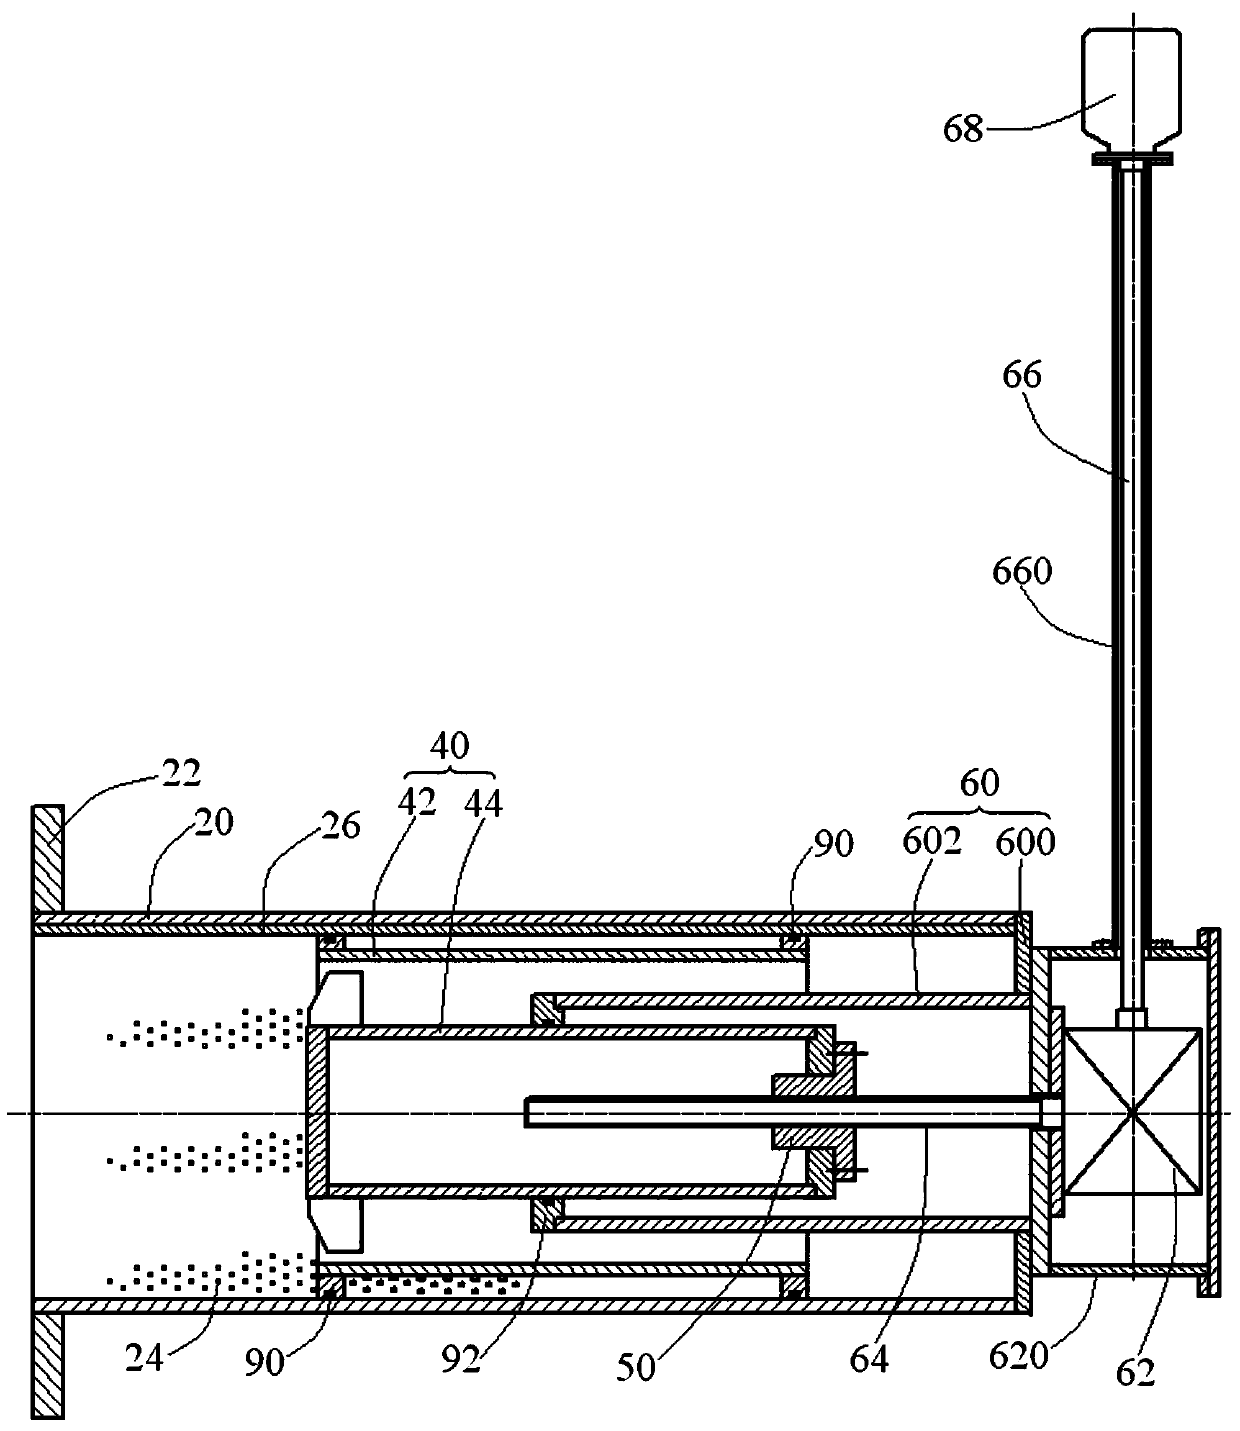 Adjustable flow energy dissipator installed inside the vessel for nuclear power plant